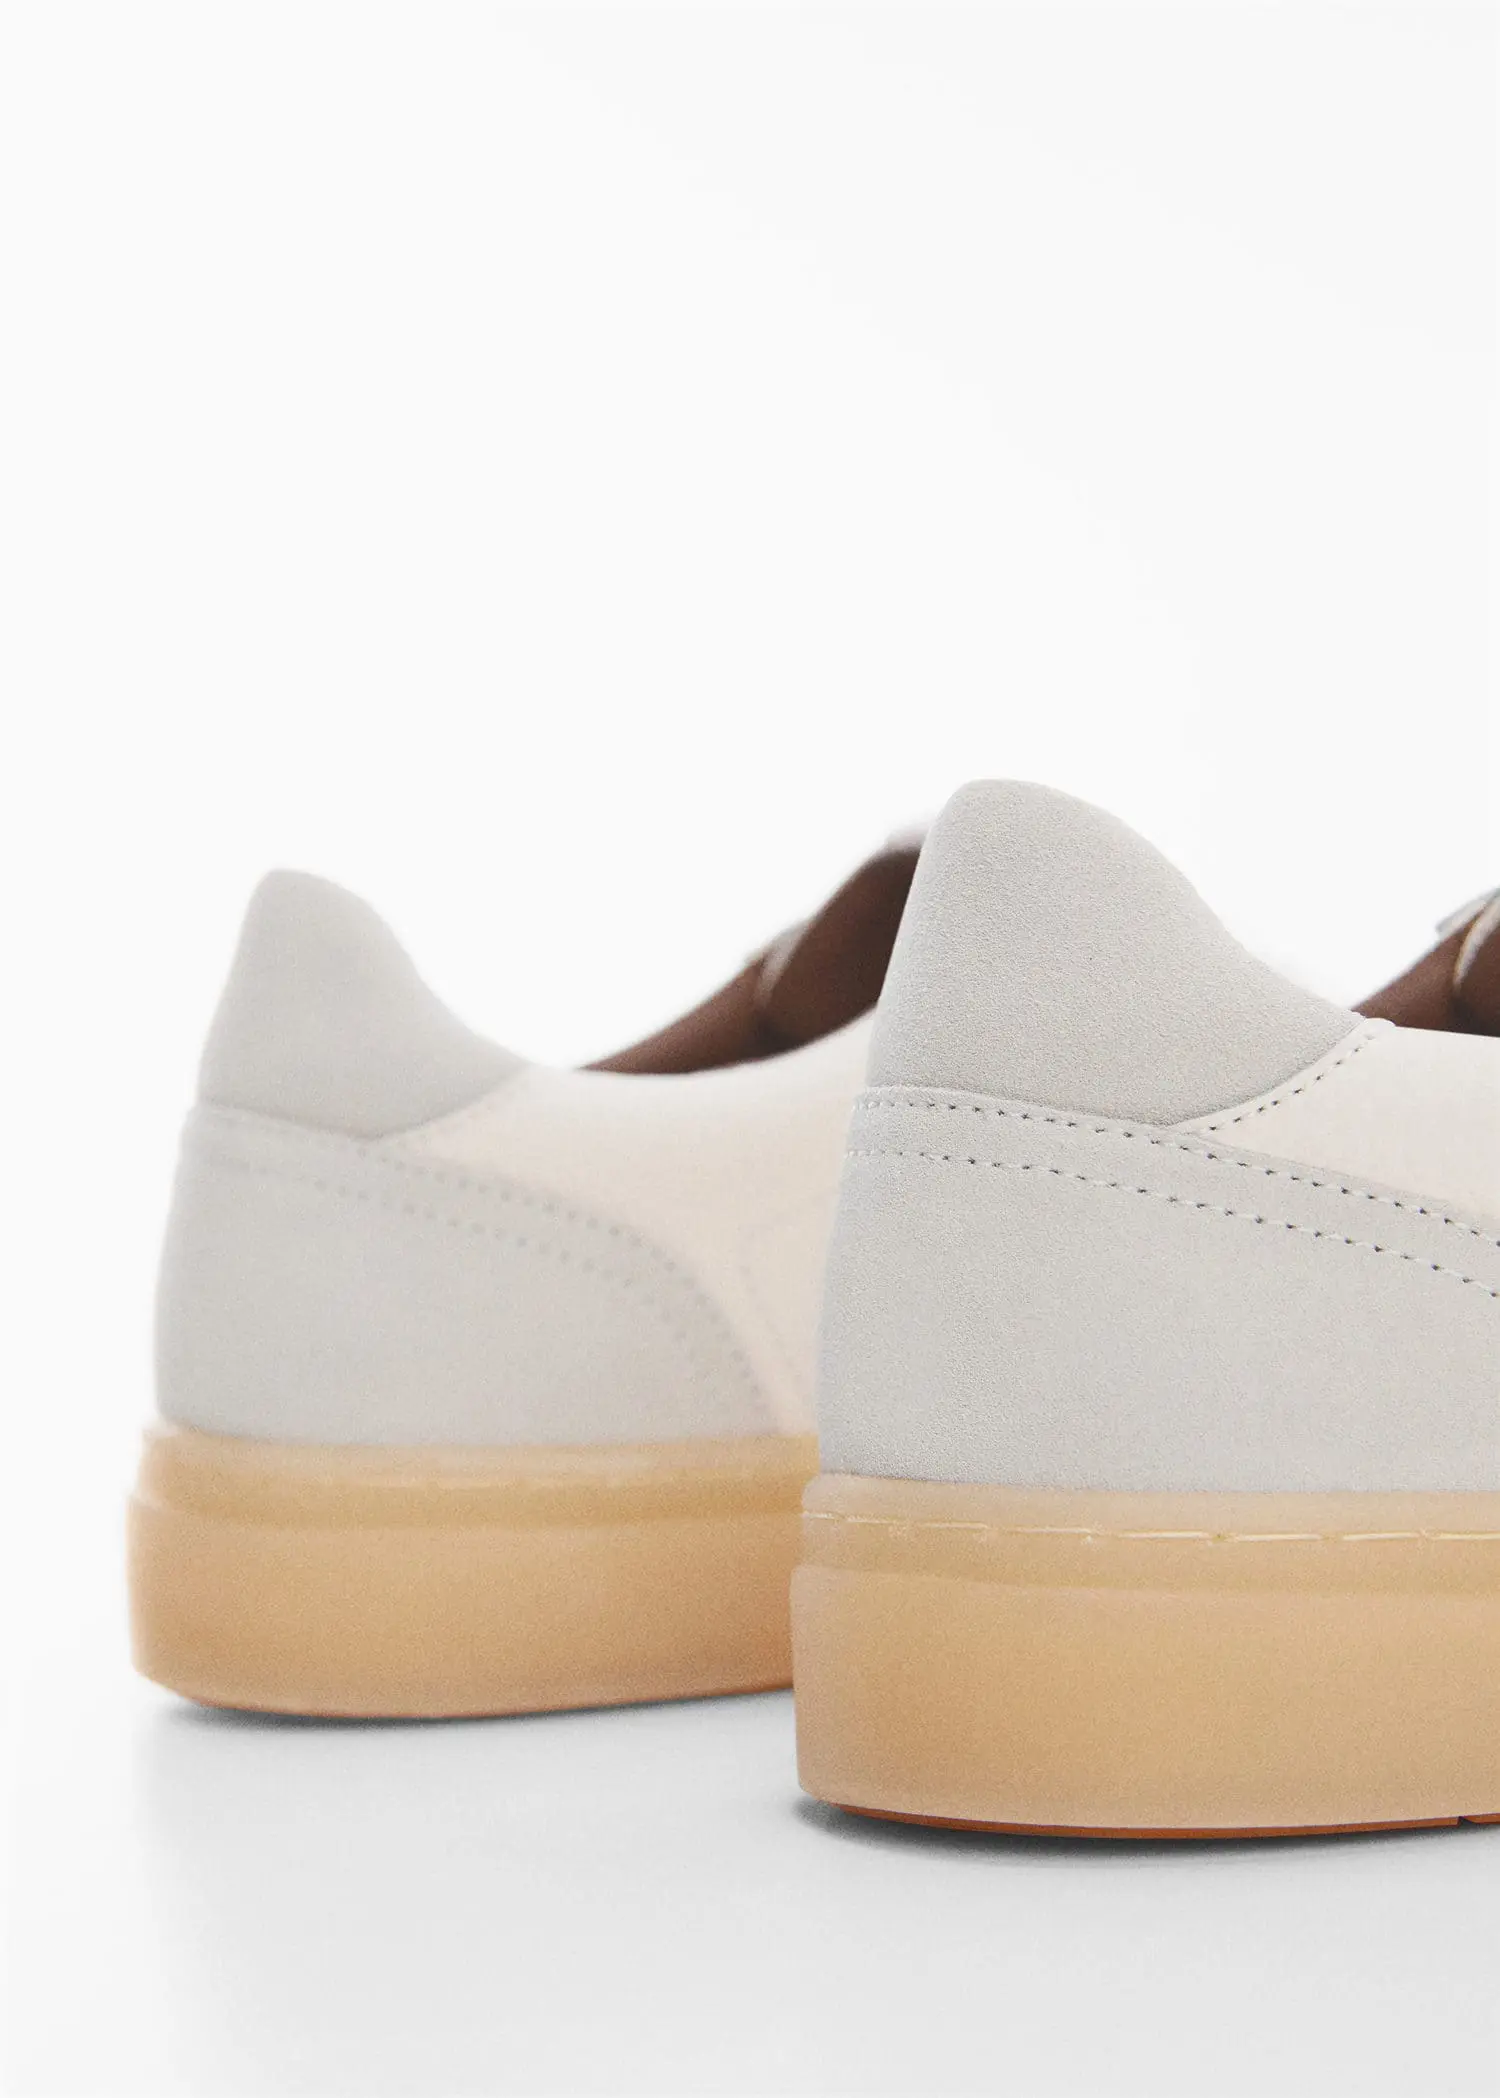 Mango Nappa leather trainers. a close up view of a pair of white shoes. 